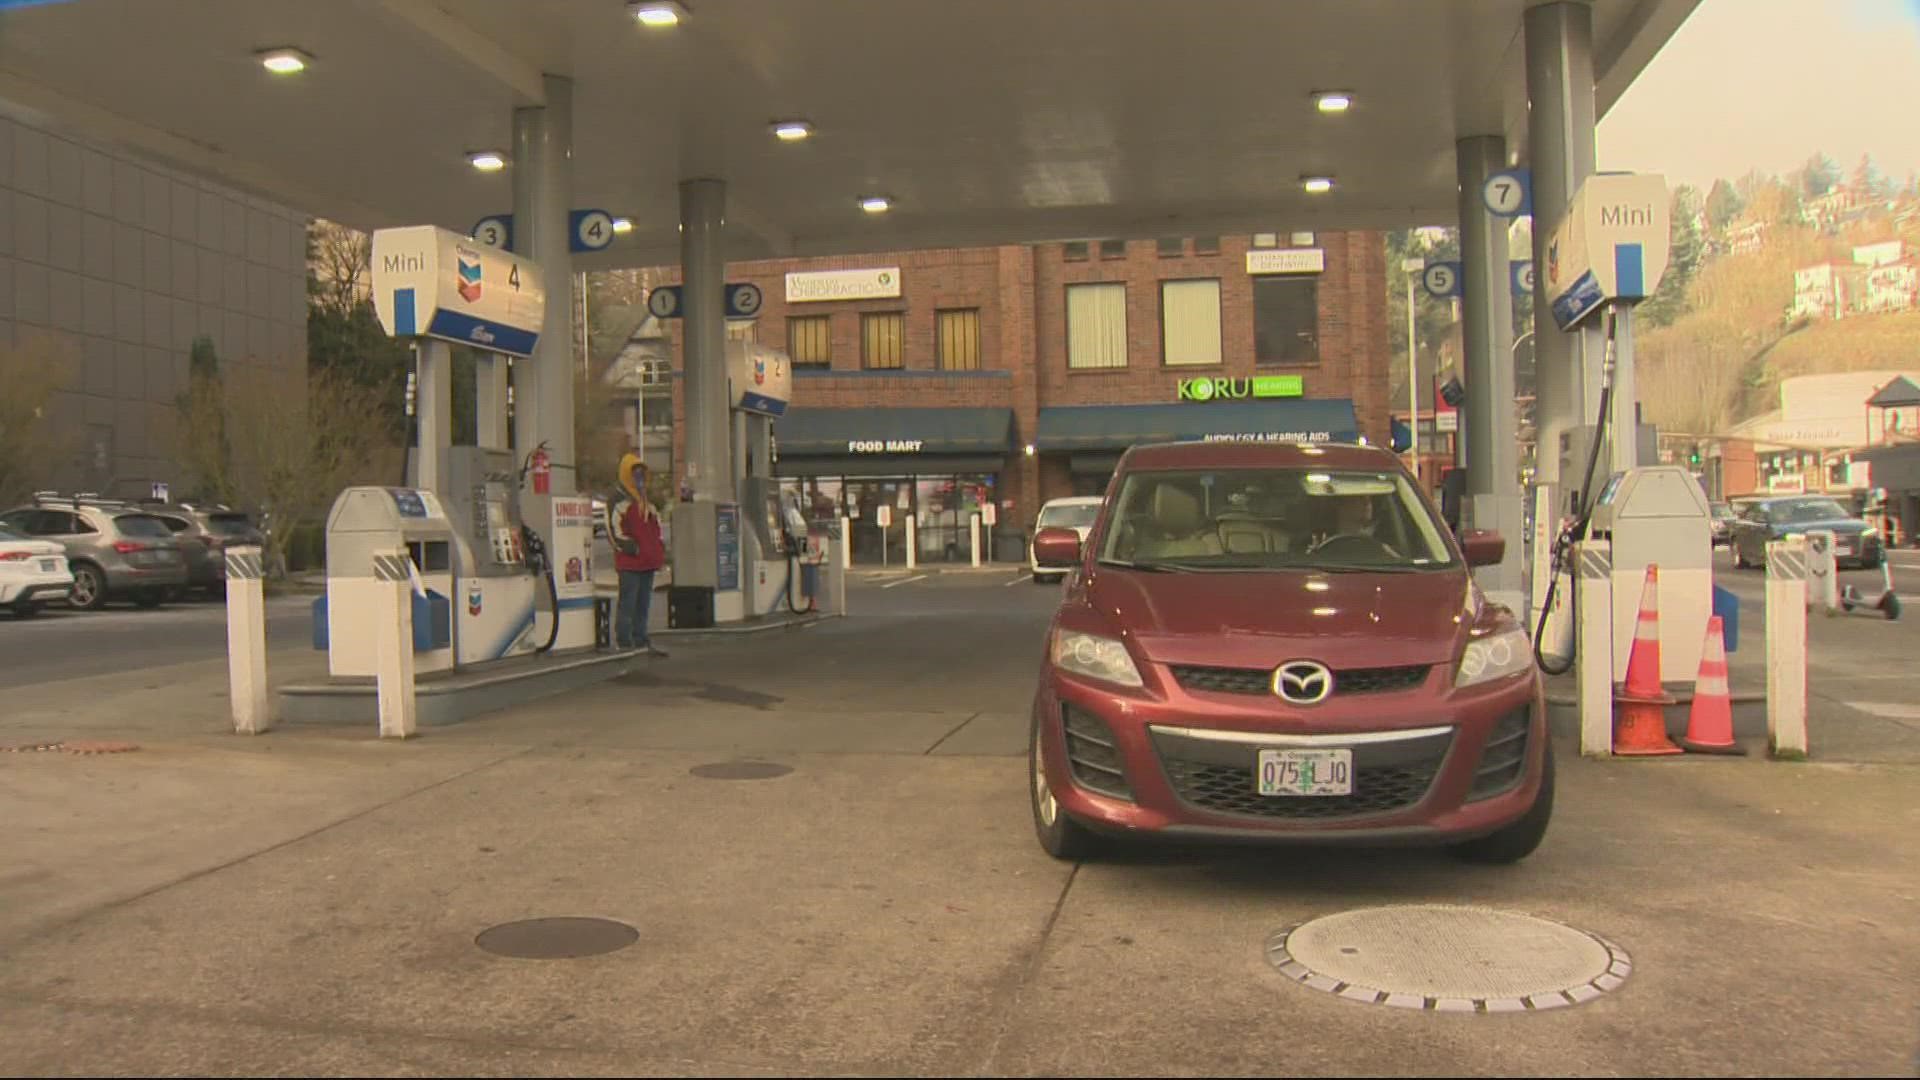 Drivers would be able to choose between pumping their own gas or having an attendant do it. Lawmakers intend to introduce the bill next month.